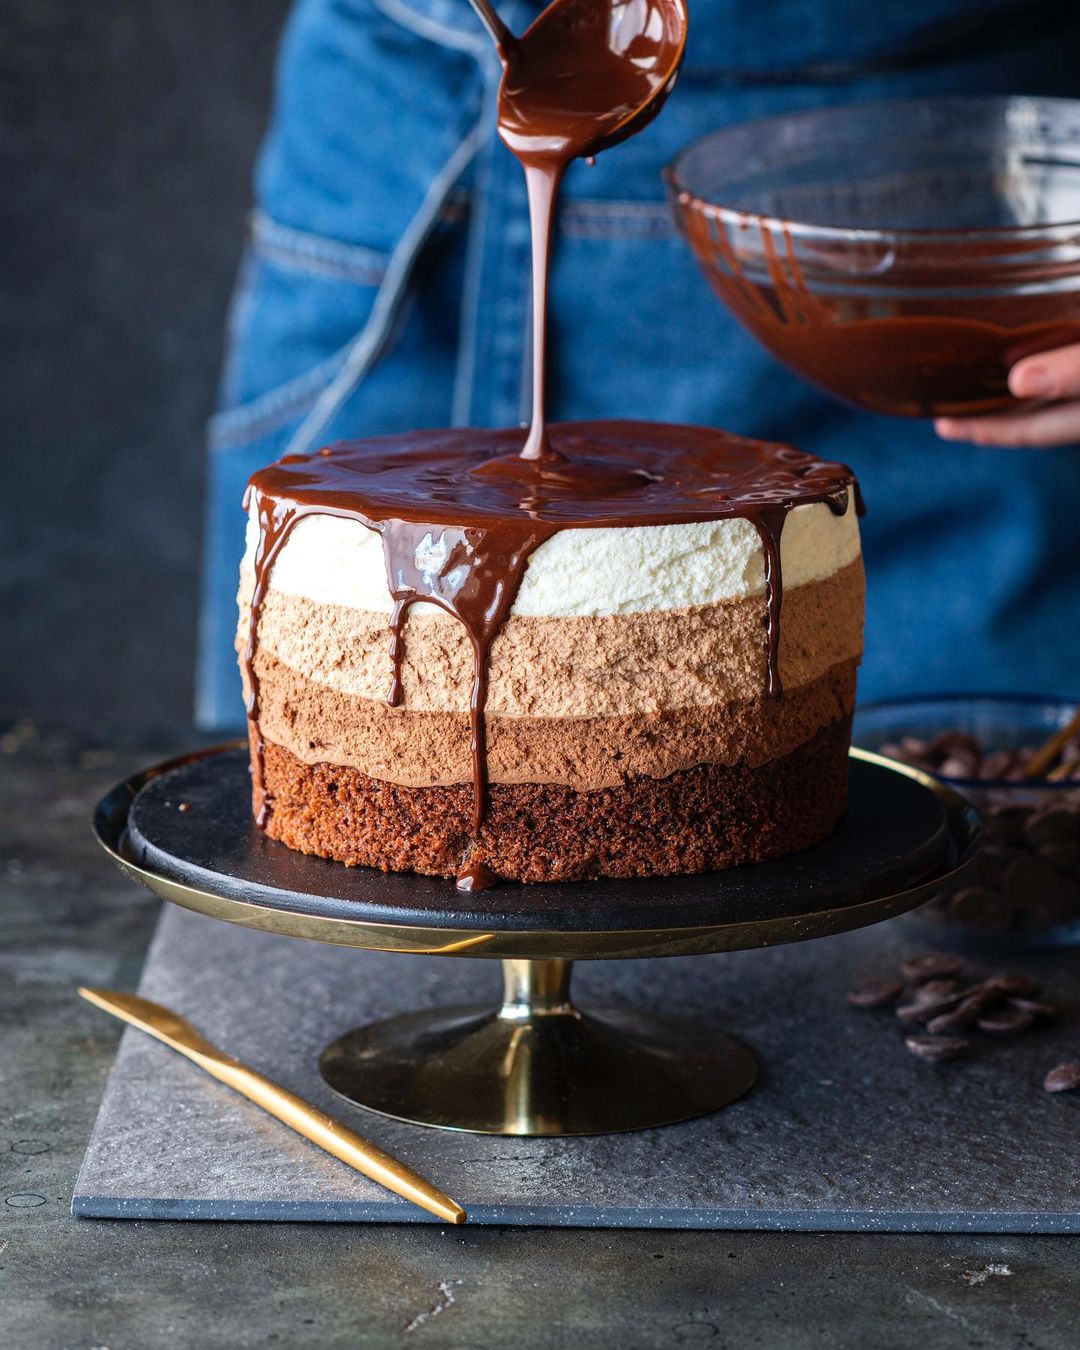 Rich three chocolate mousse cake